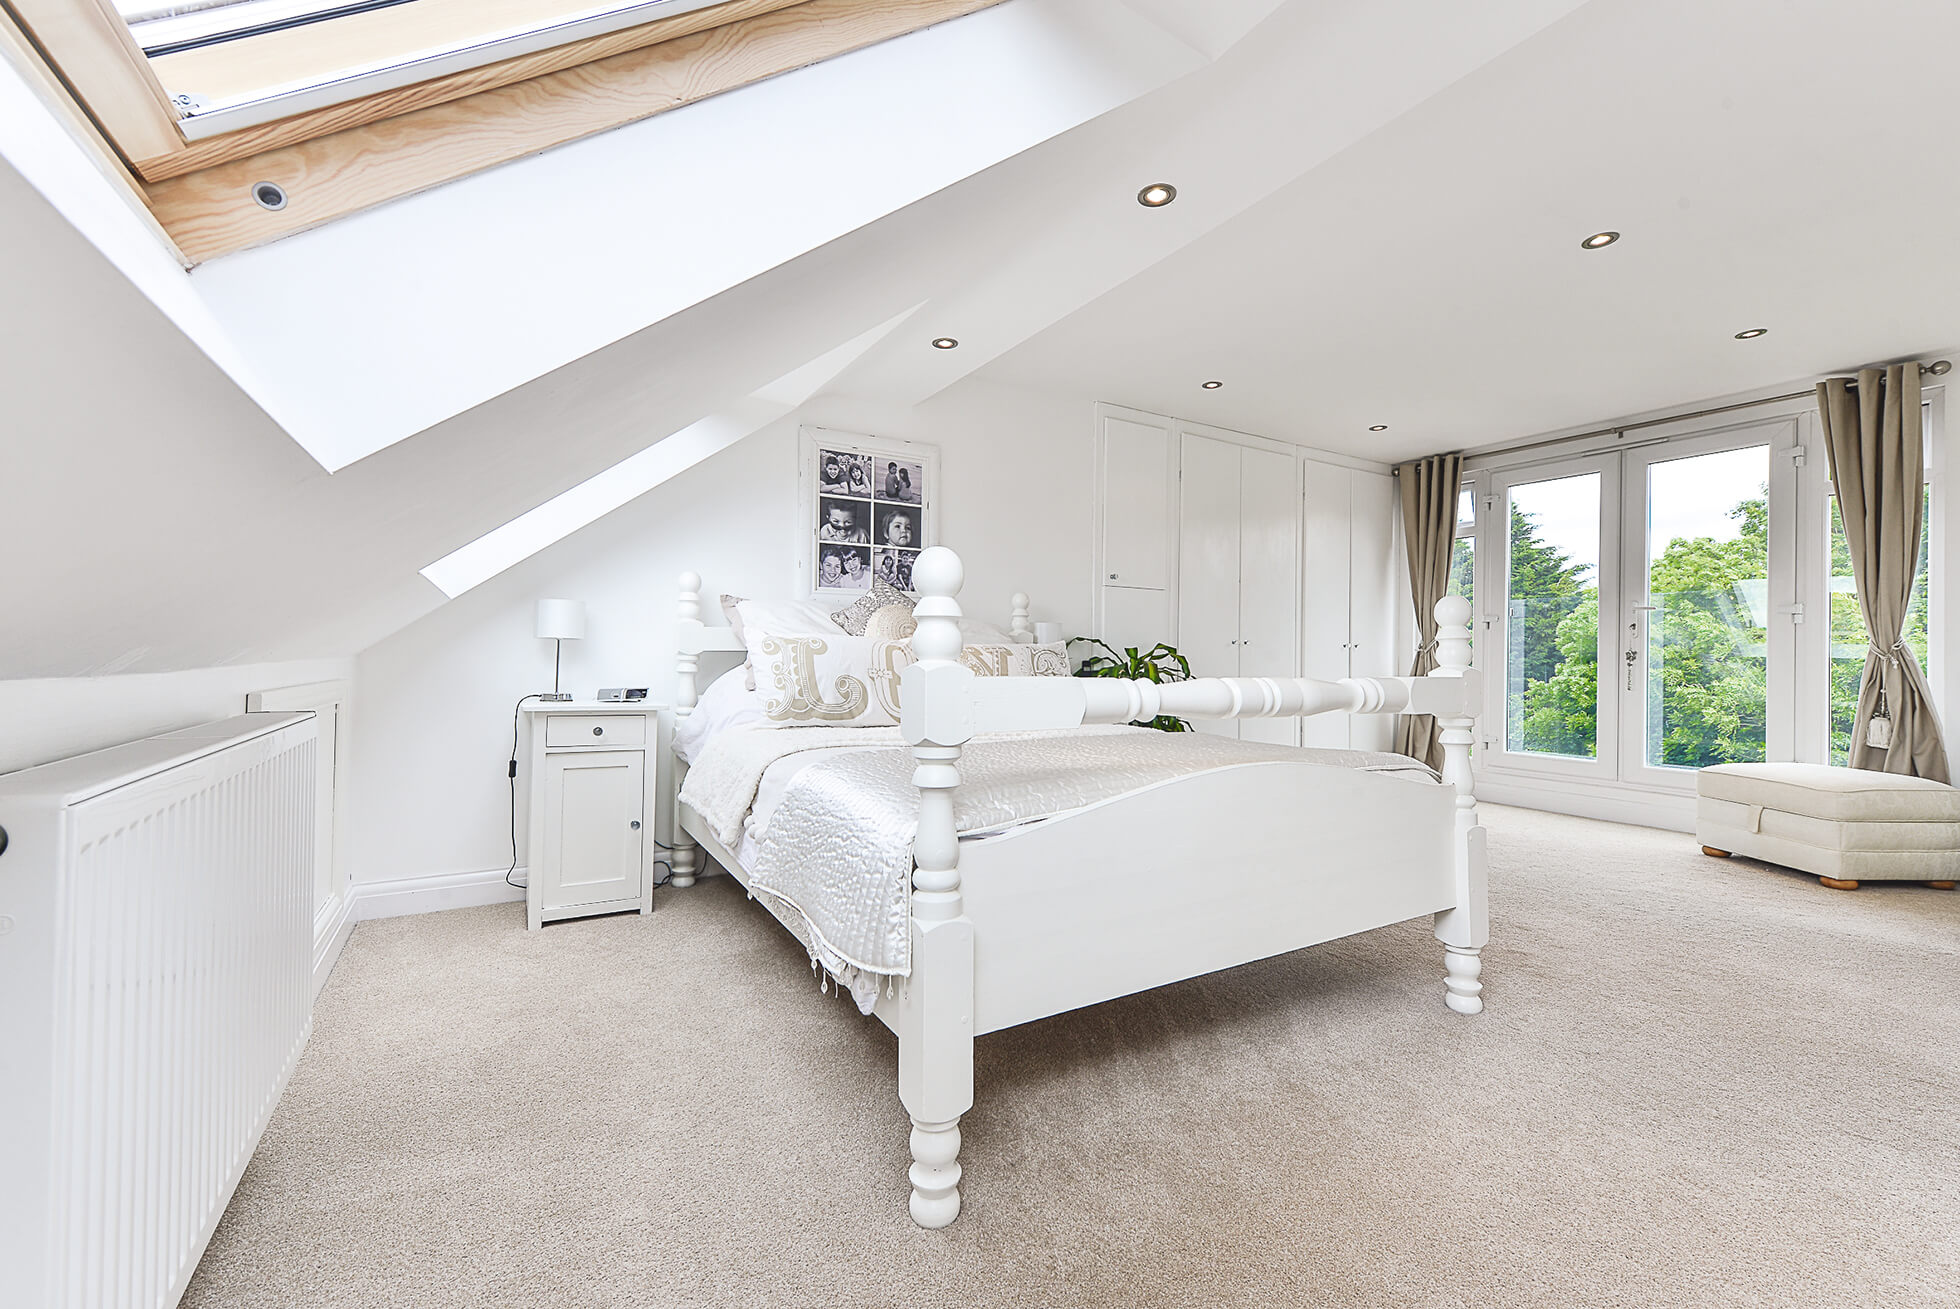 Do you have a question about converting your Loft in Eastbury? Here are the most popular questions asked by our clients.